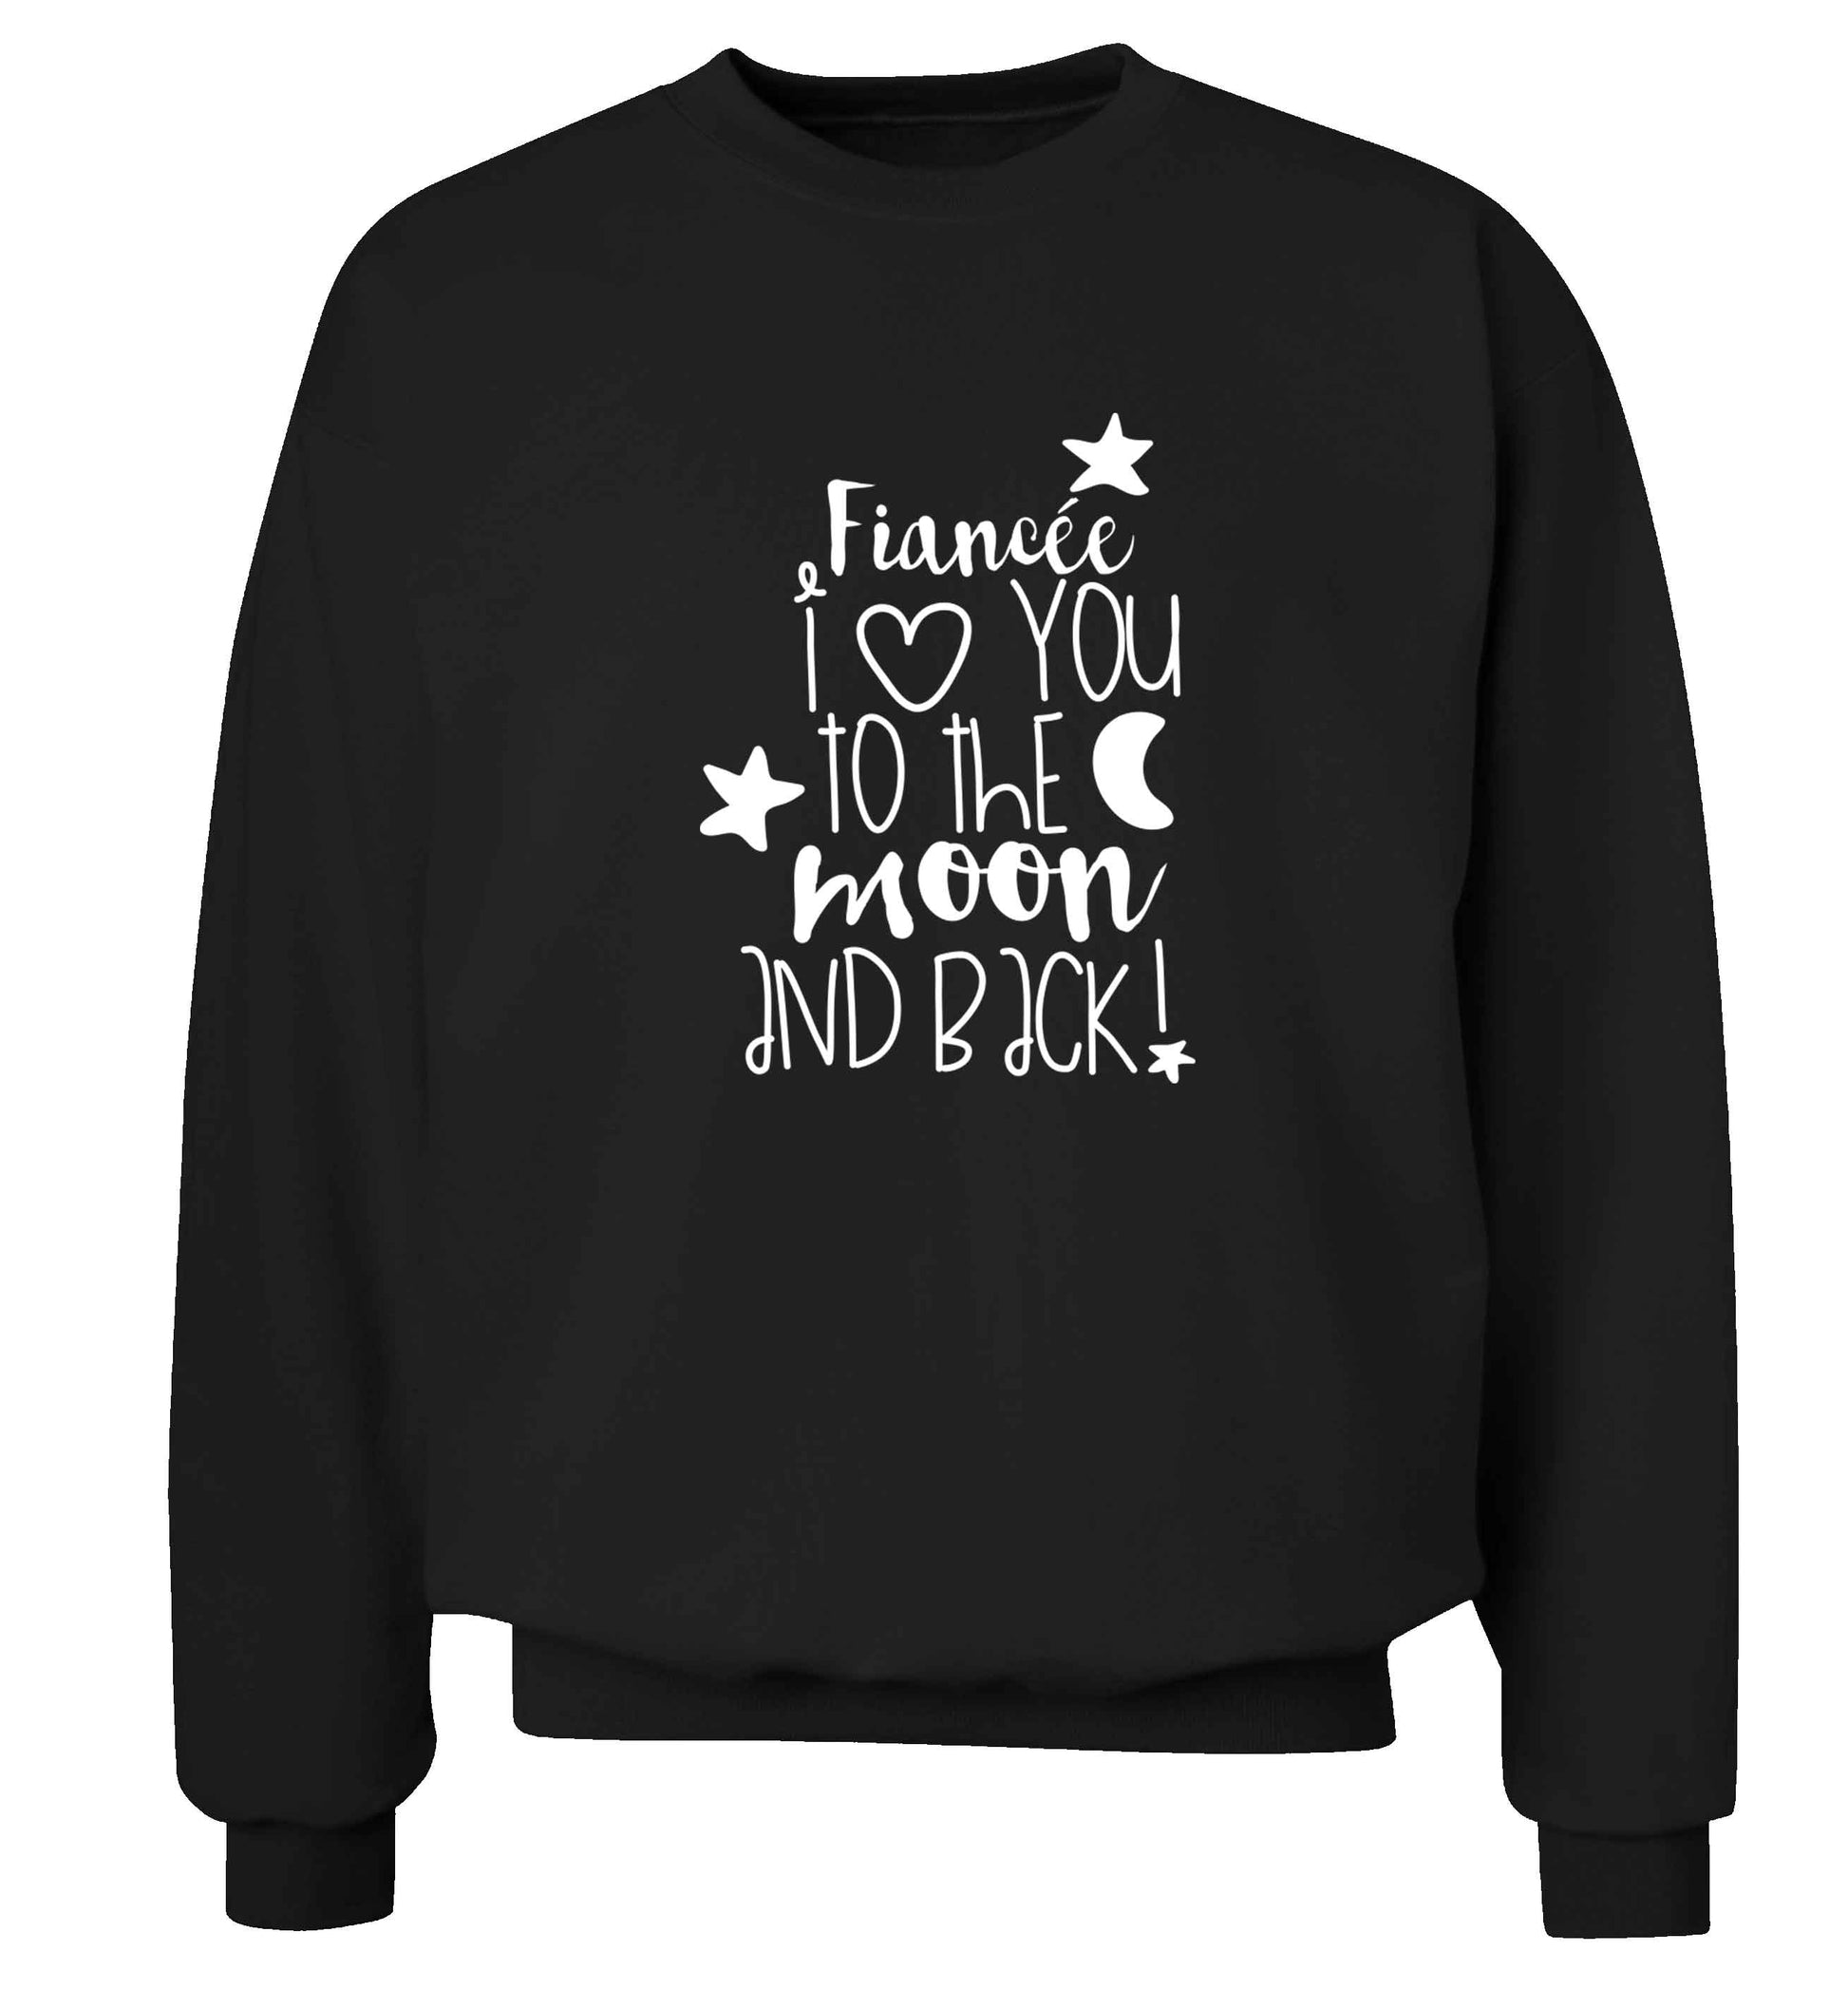 Fiancée I love you to the moon and back adult's unisex black sweater 2XL